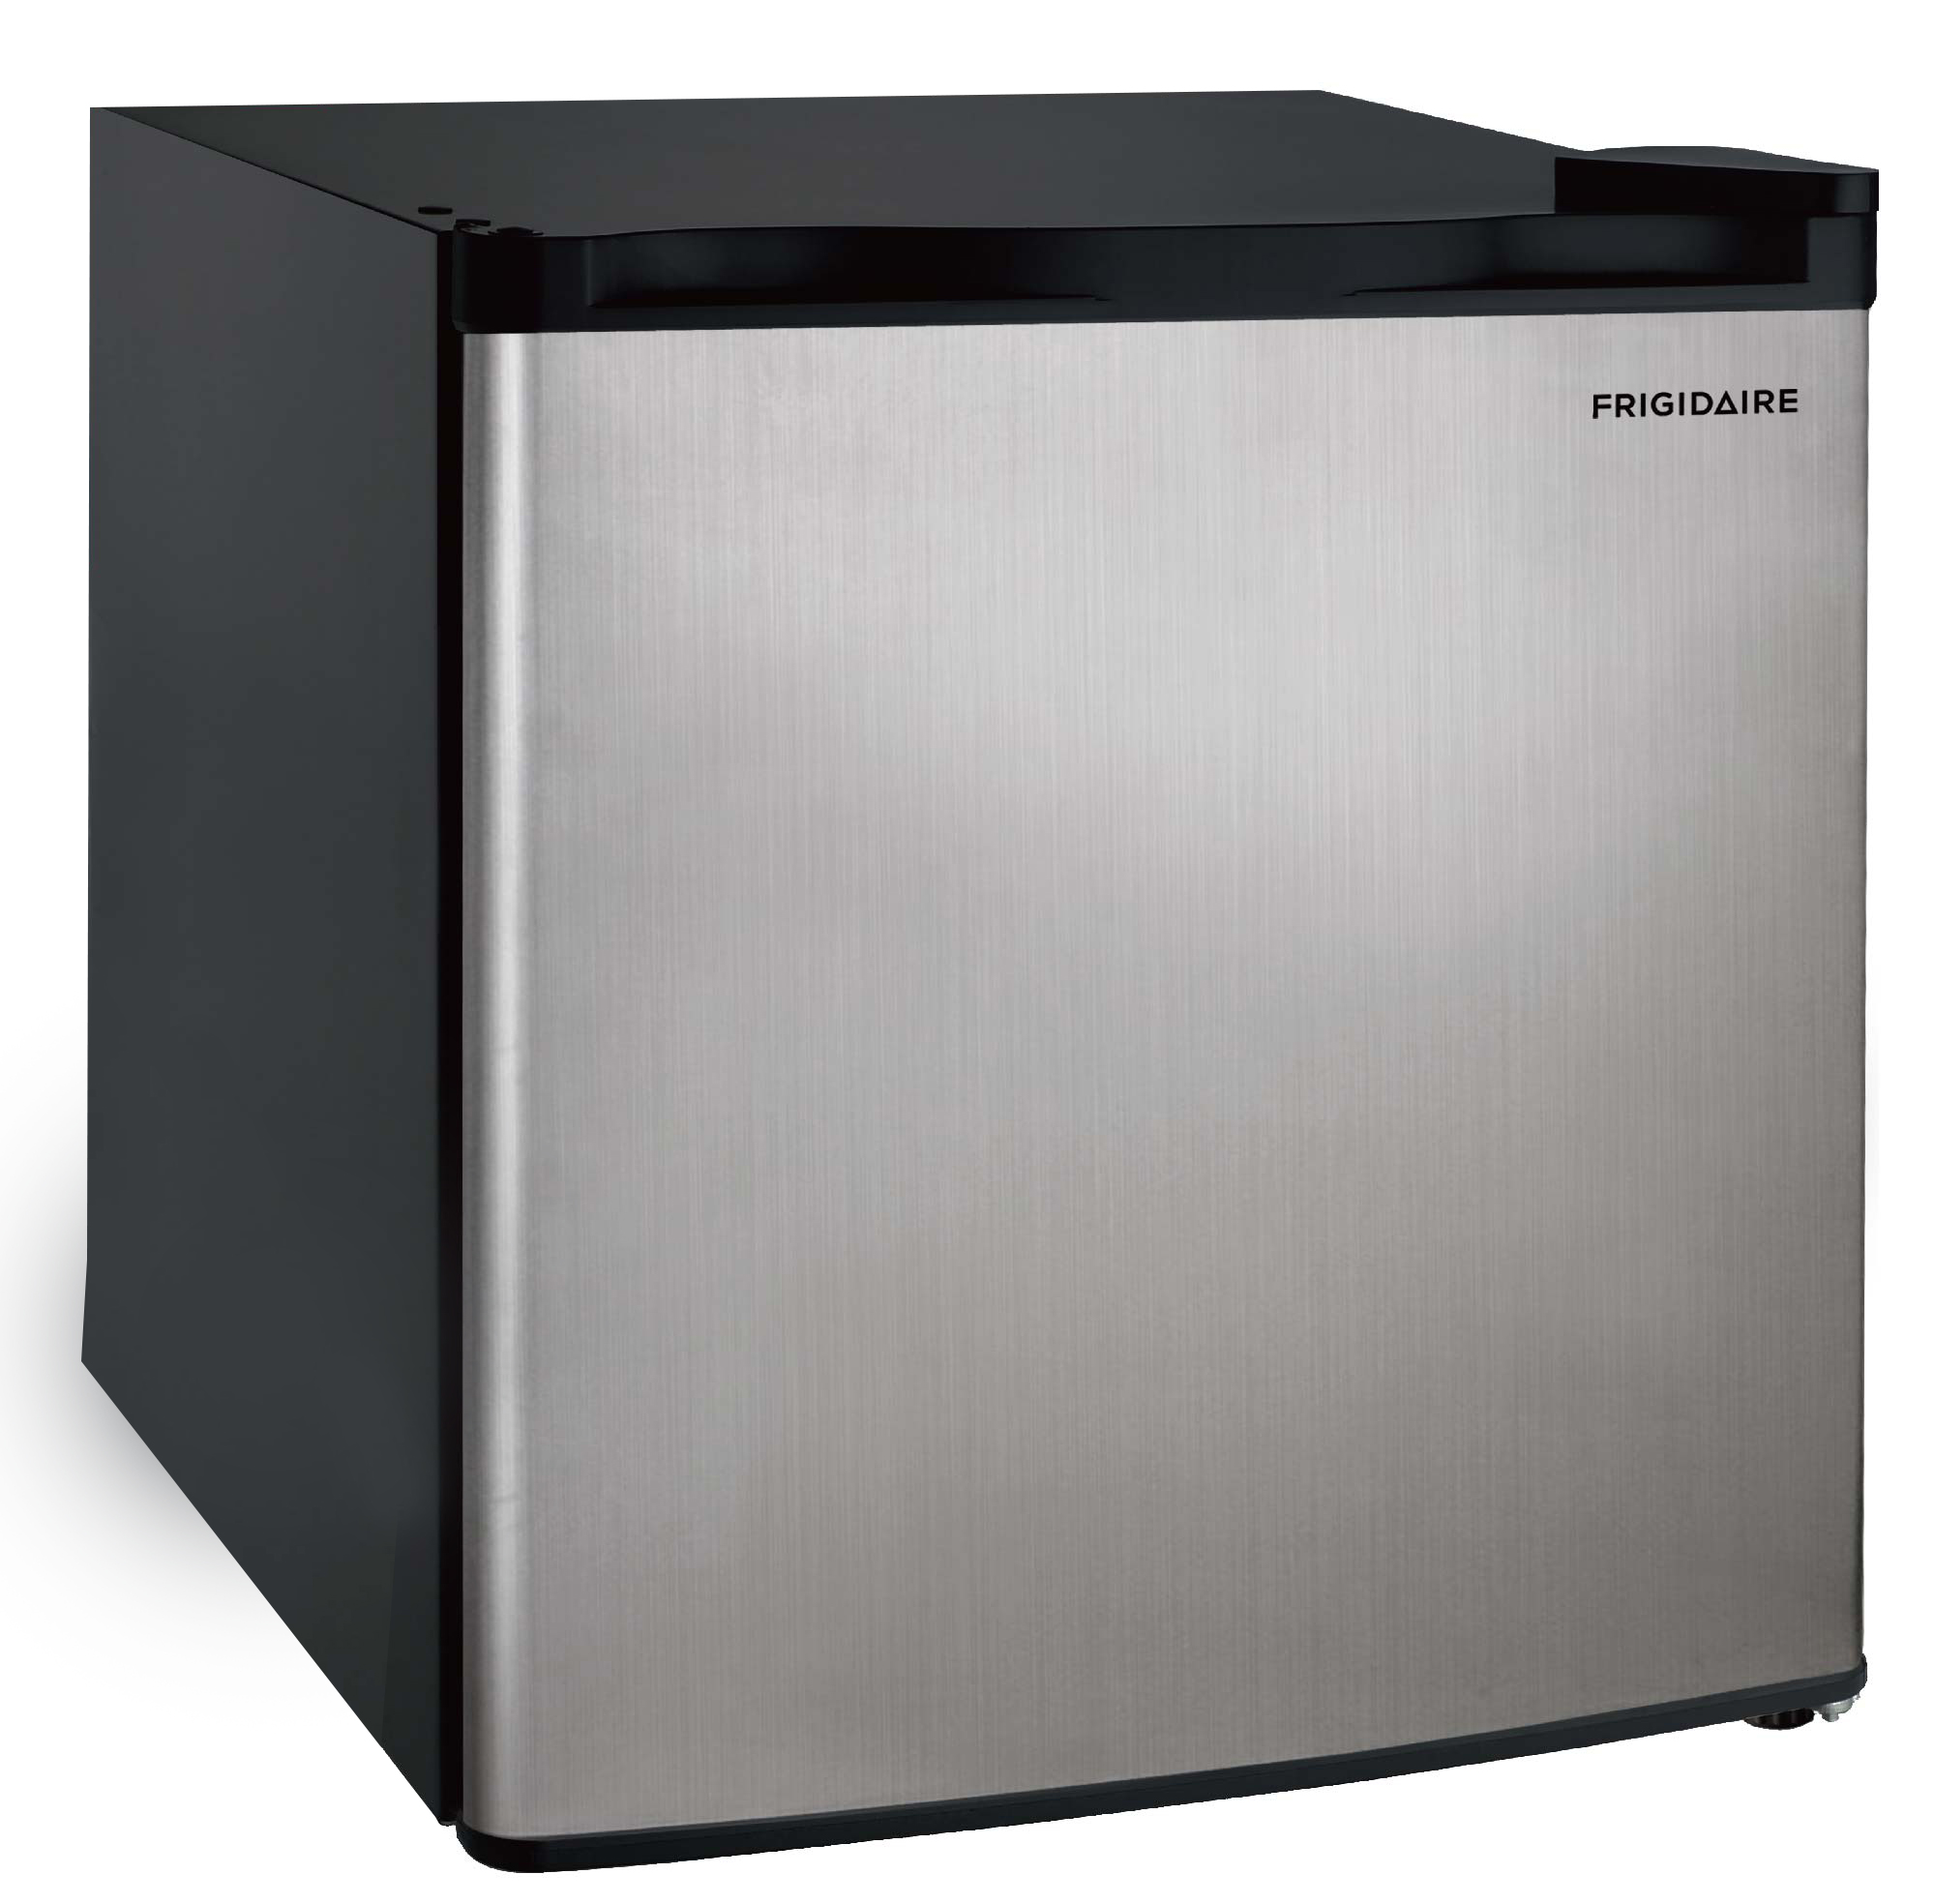 Frigidaire 1.6 Cu Ft Compact Refrigerator, Stainless Steel - image 1 of 6